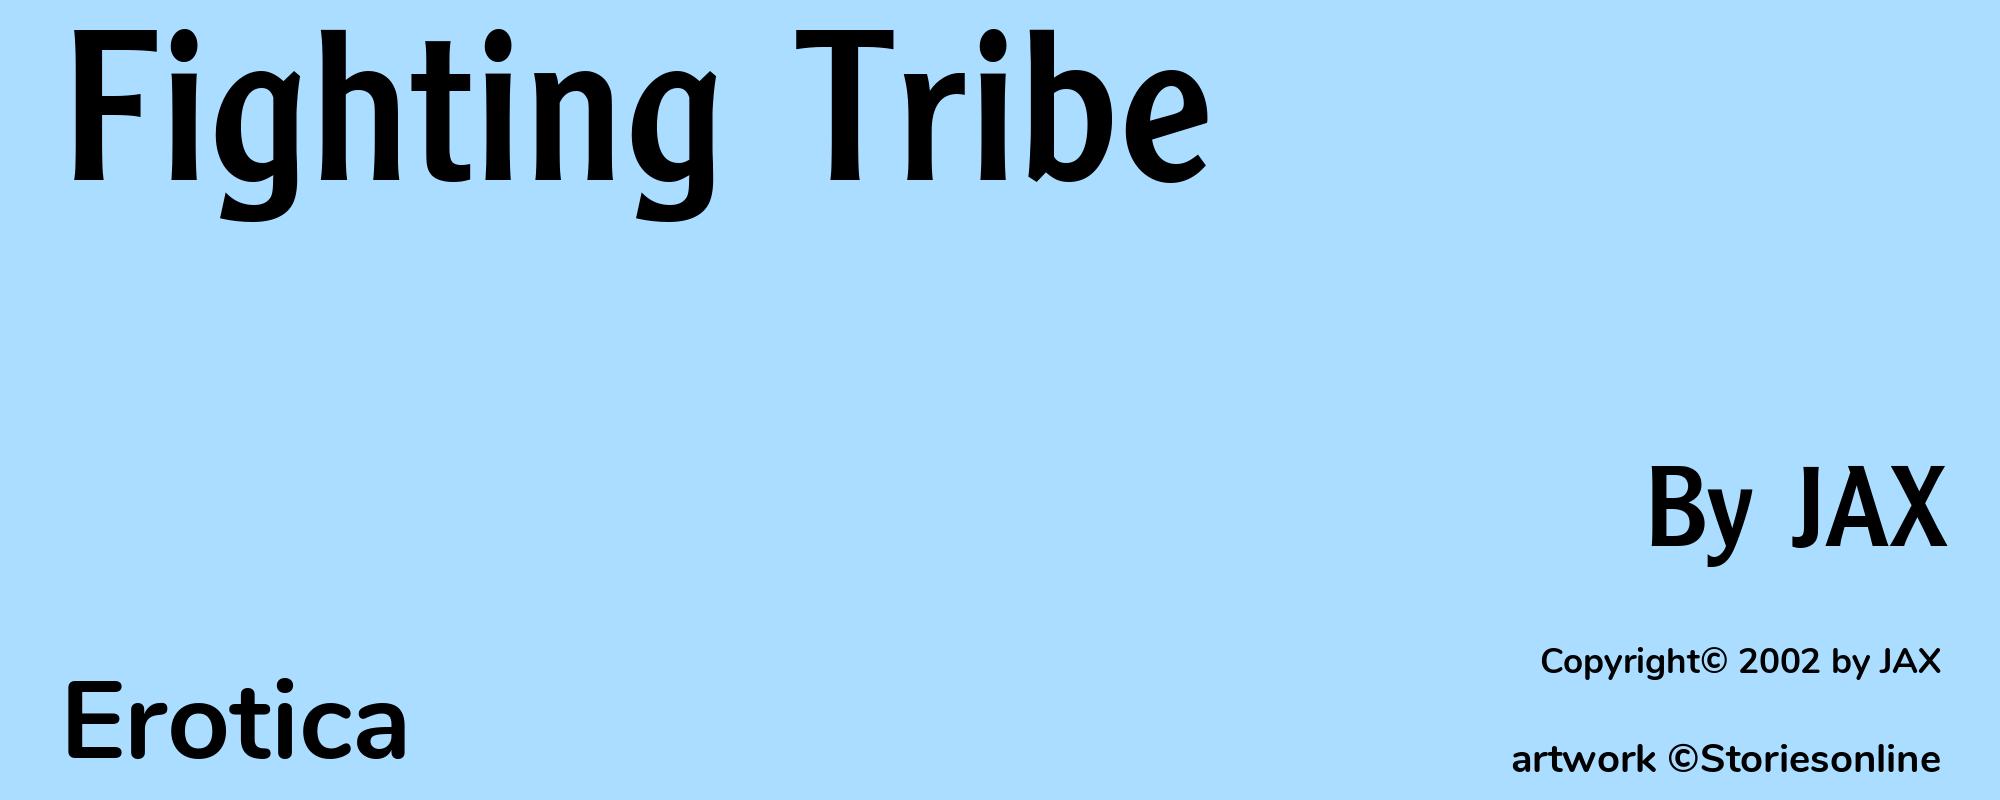 Fighting Tribe - Cover